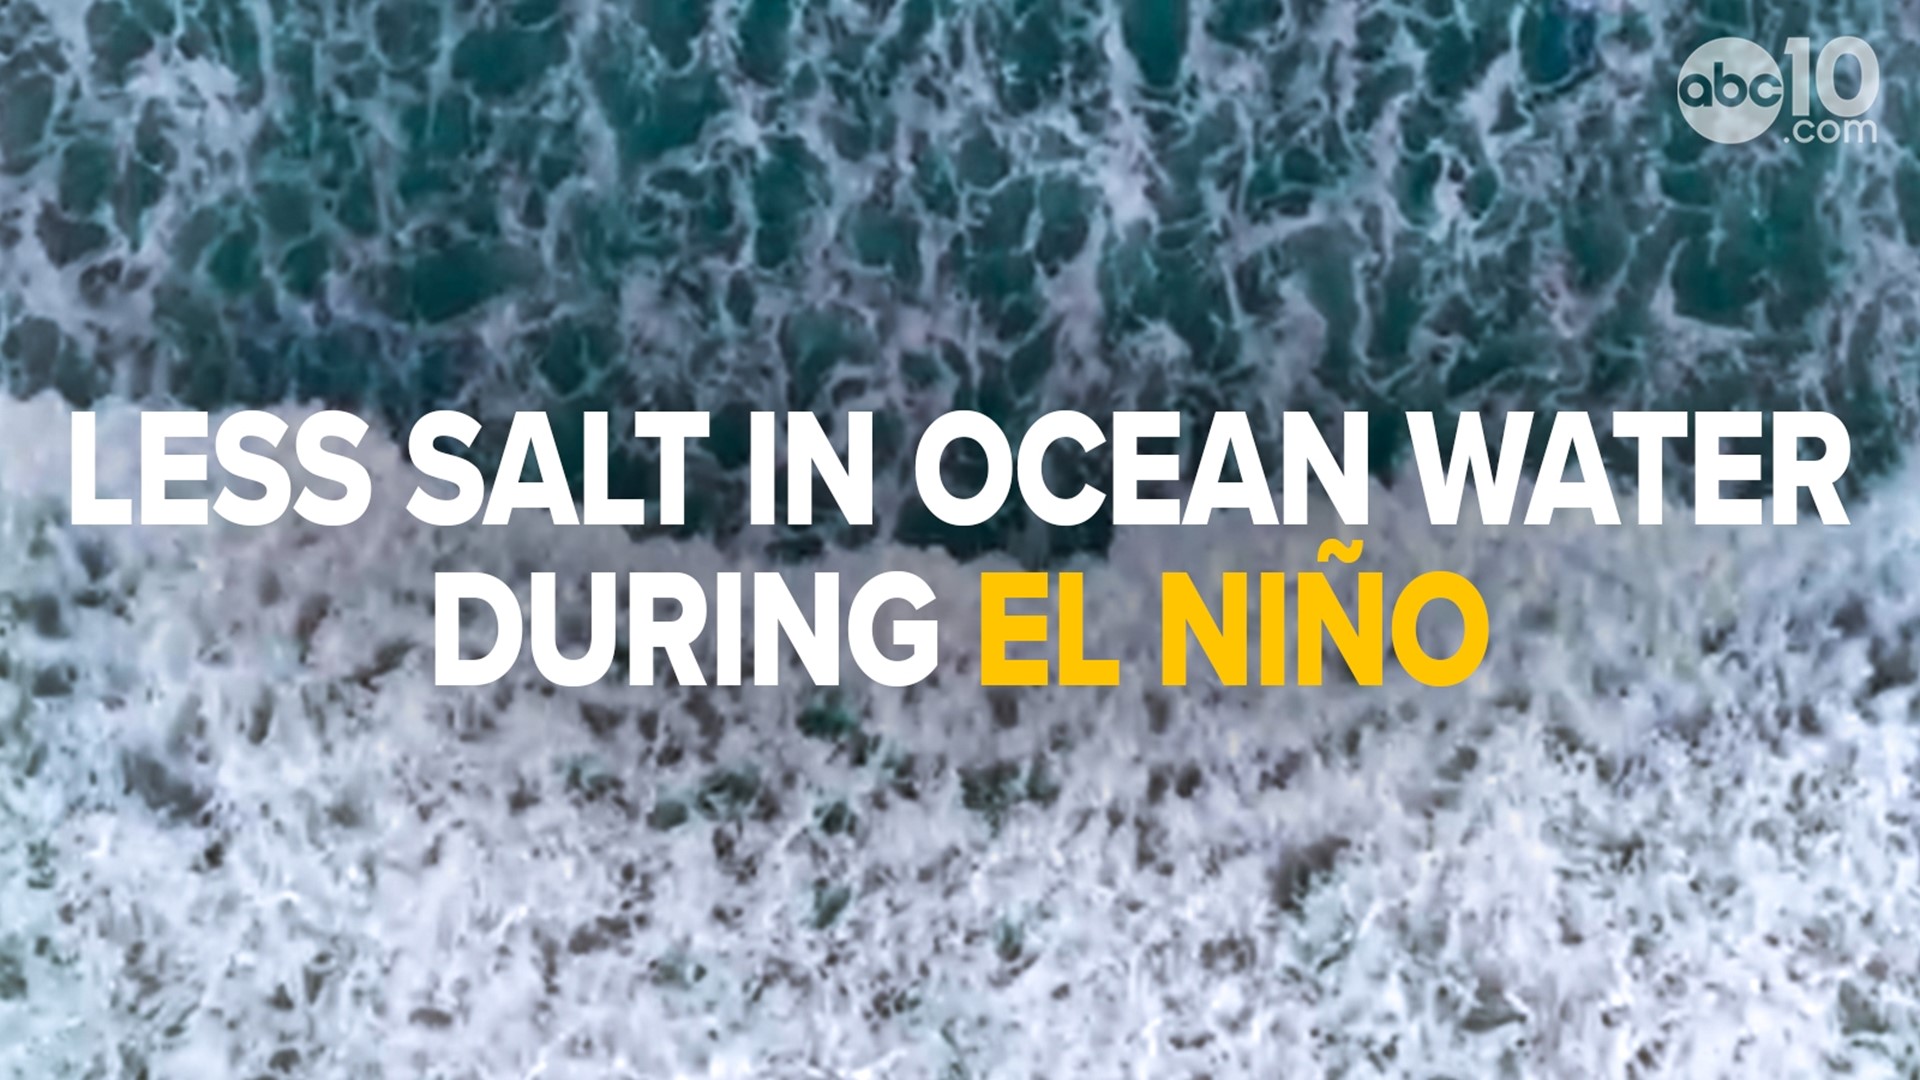 A new studying measuring more than 100 year of ocean salt water found during the El Niño and La Niña years, there was less salt in the California coast water.